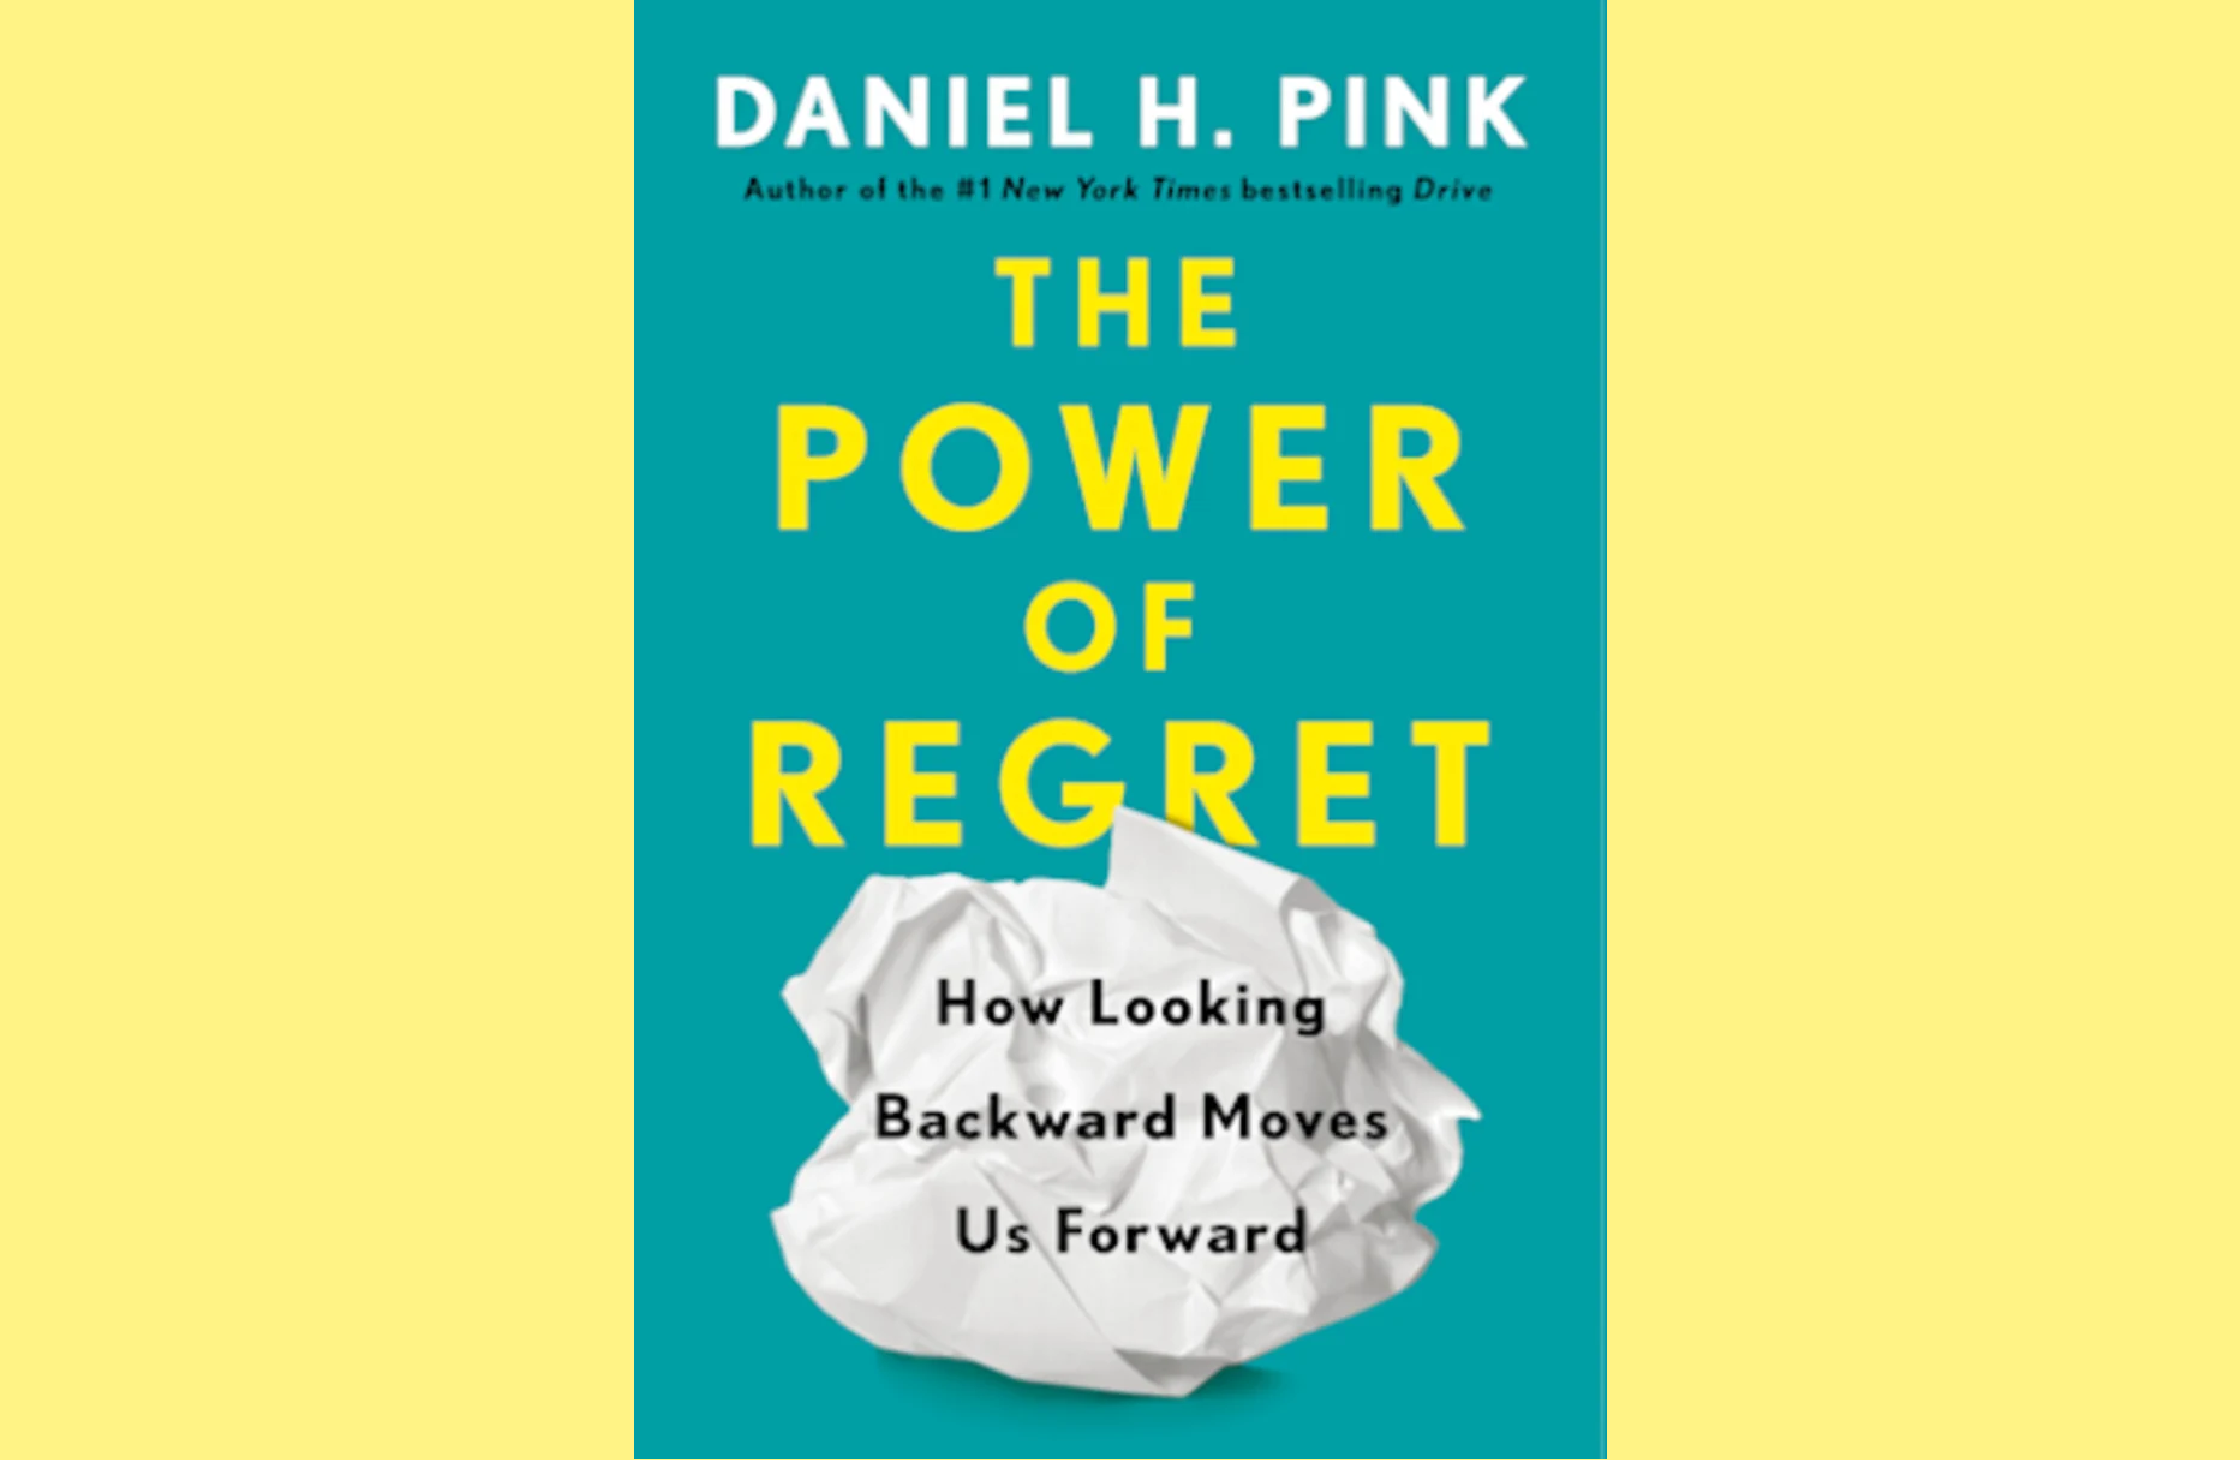 Summary: The Power of Regret by Daniel H. Pink